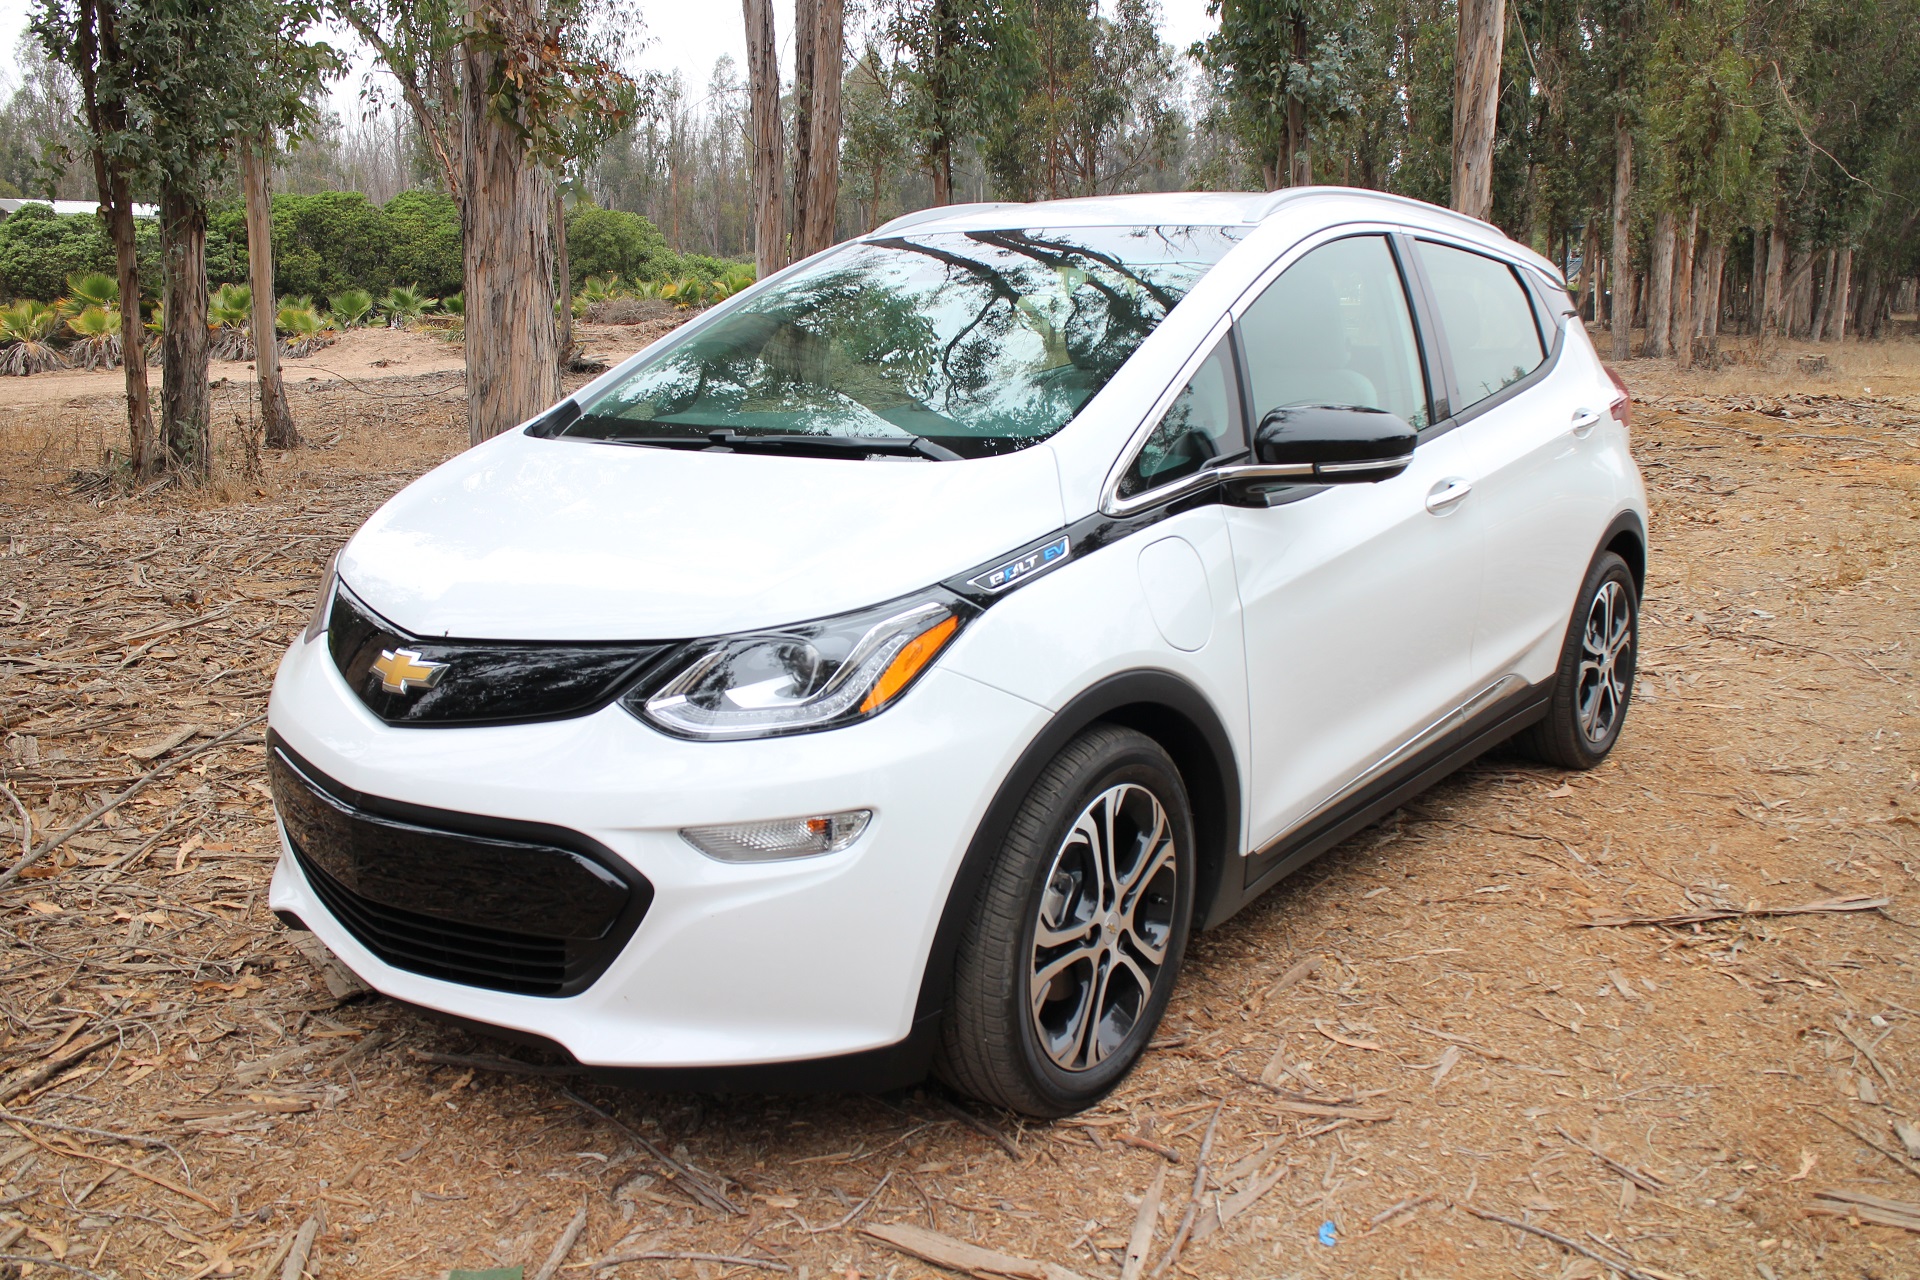 chevrolet-planning-to-launch-200-mile-bolt-electric-vehicle-in-late